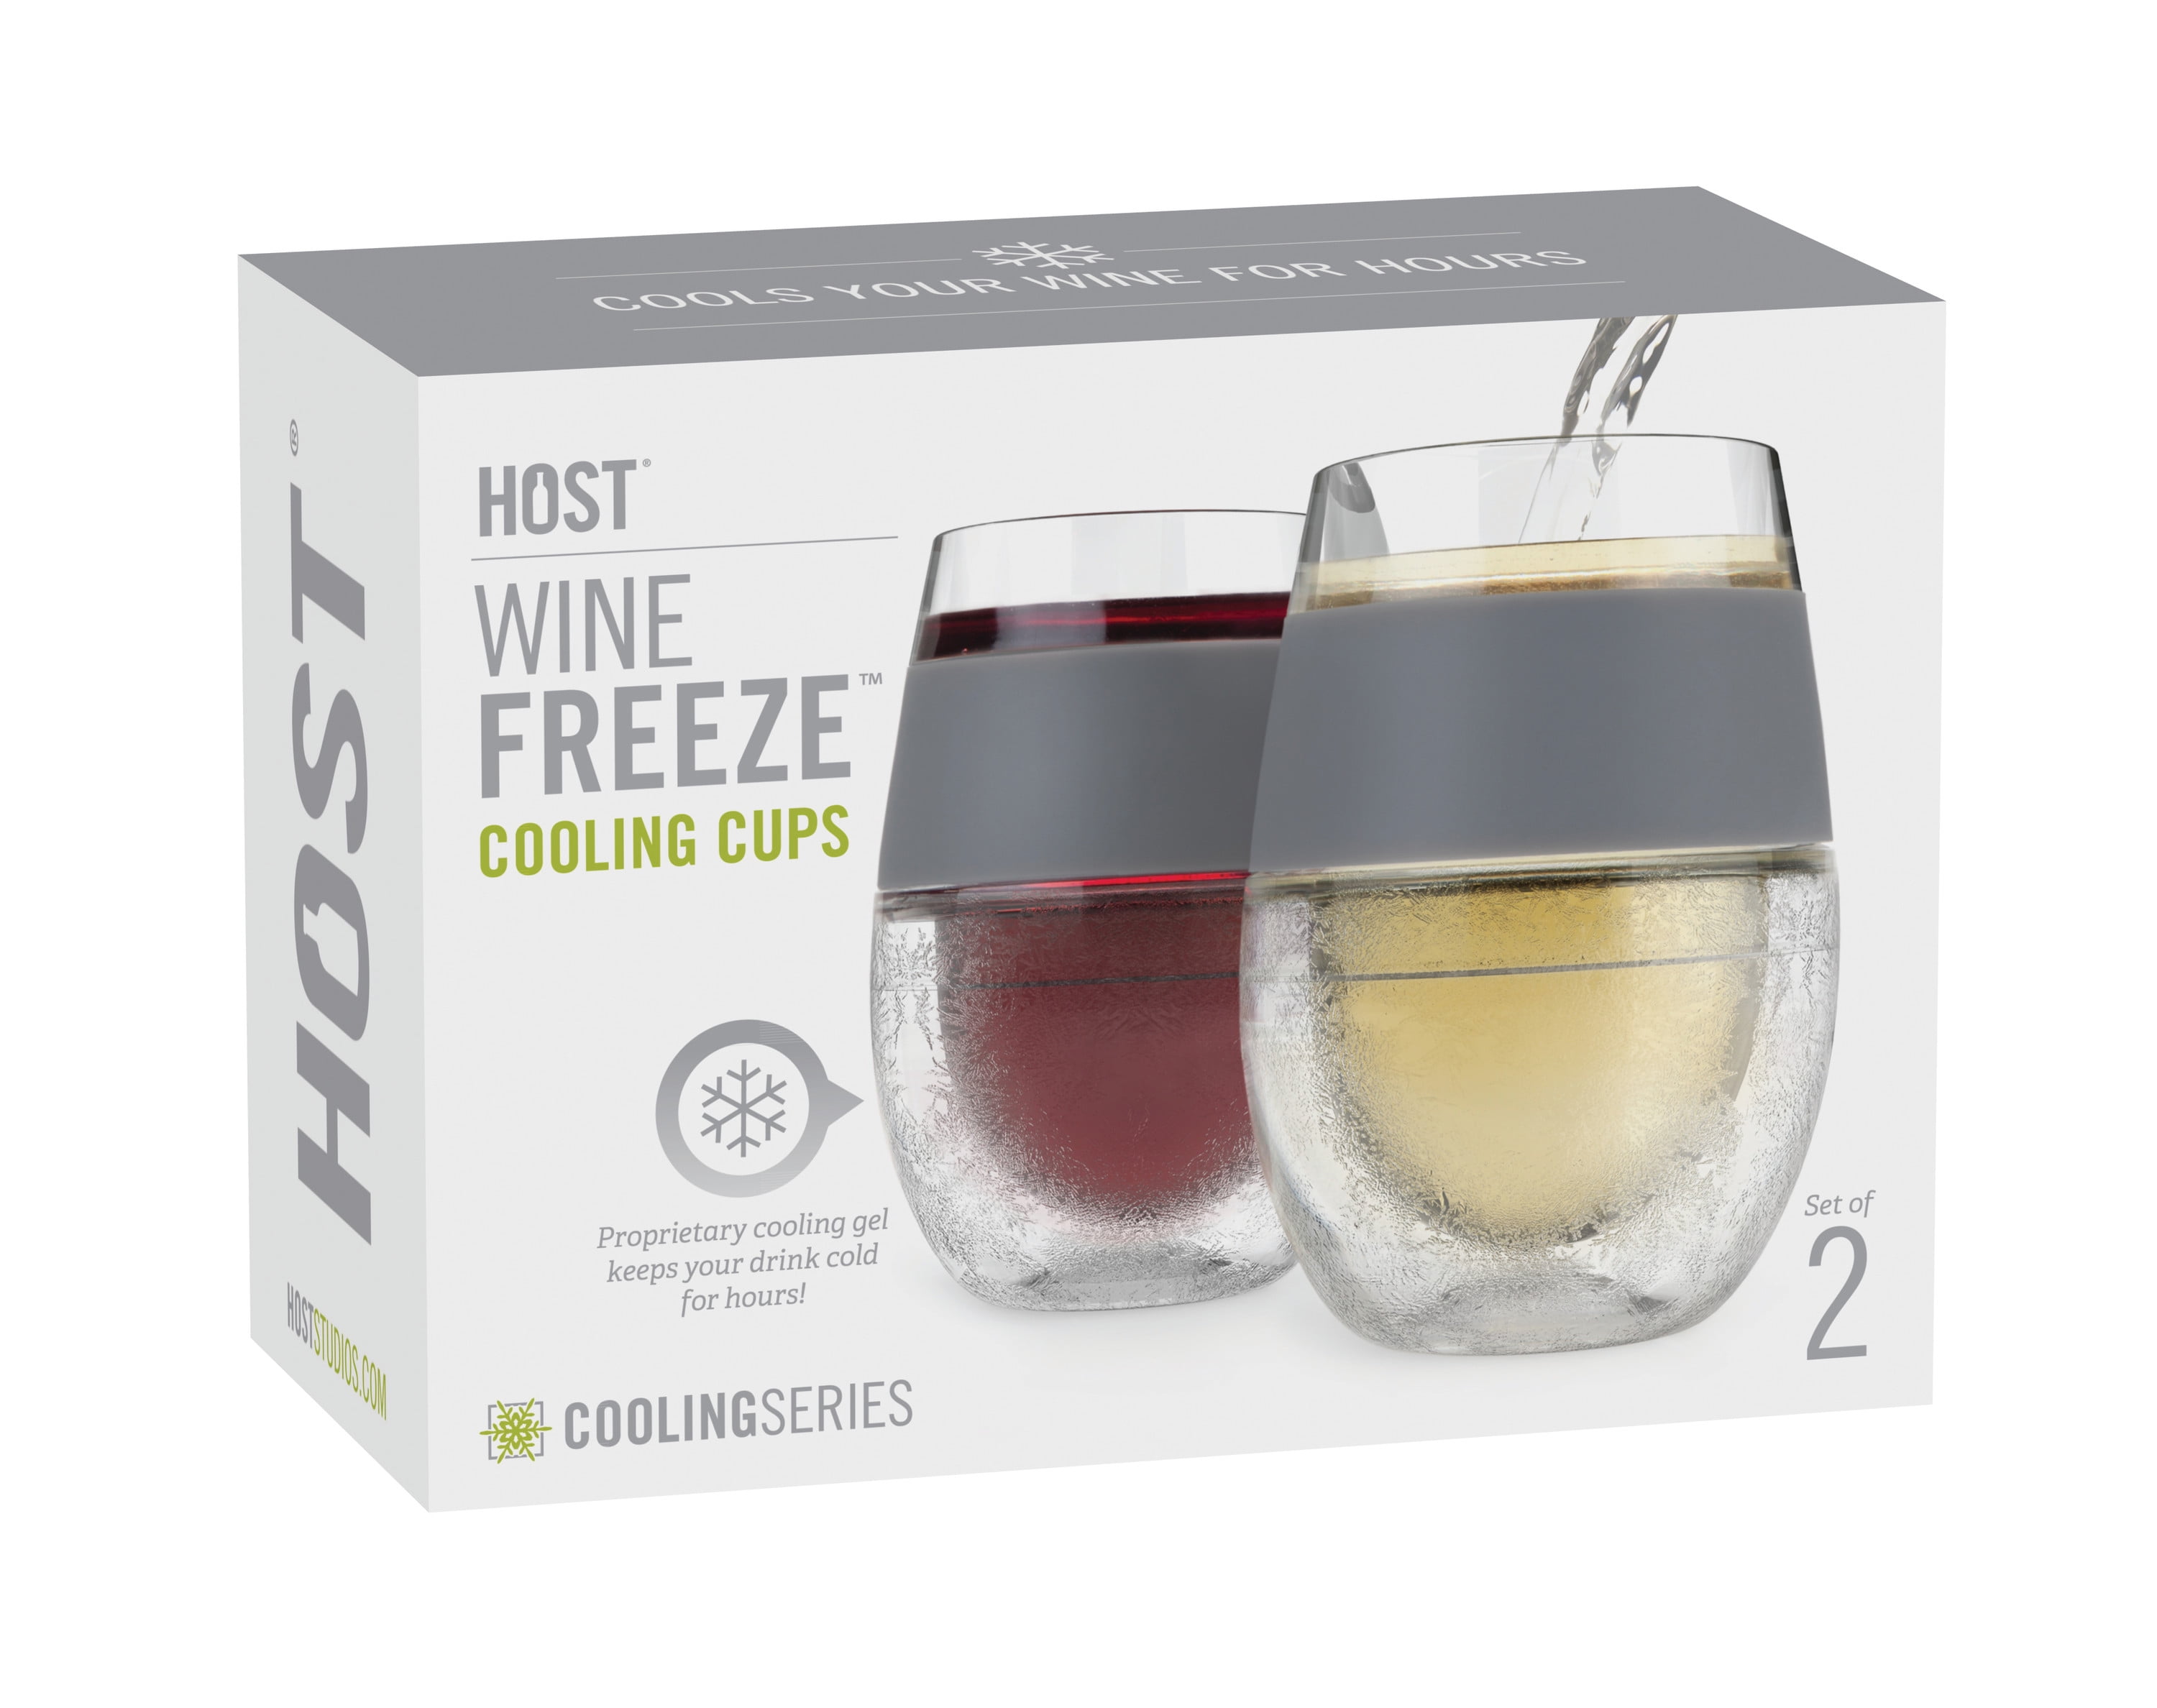 Wine FREEZE Cooling Cups (set of 4) by HOST - The Best Wine Store